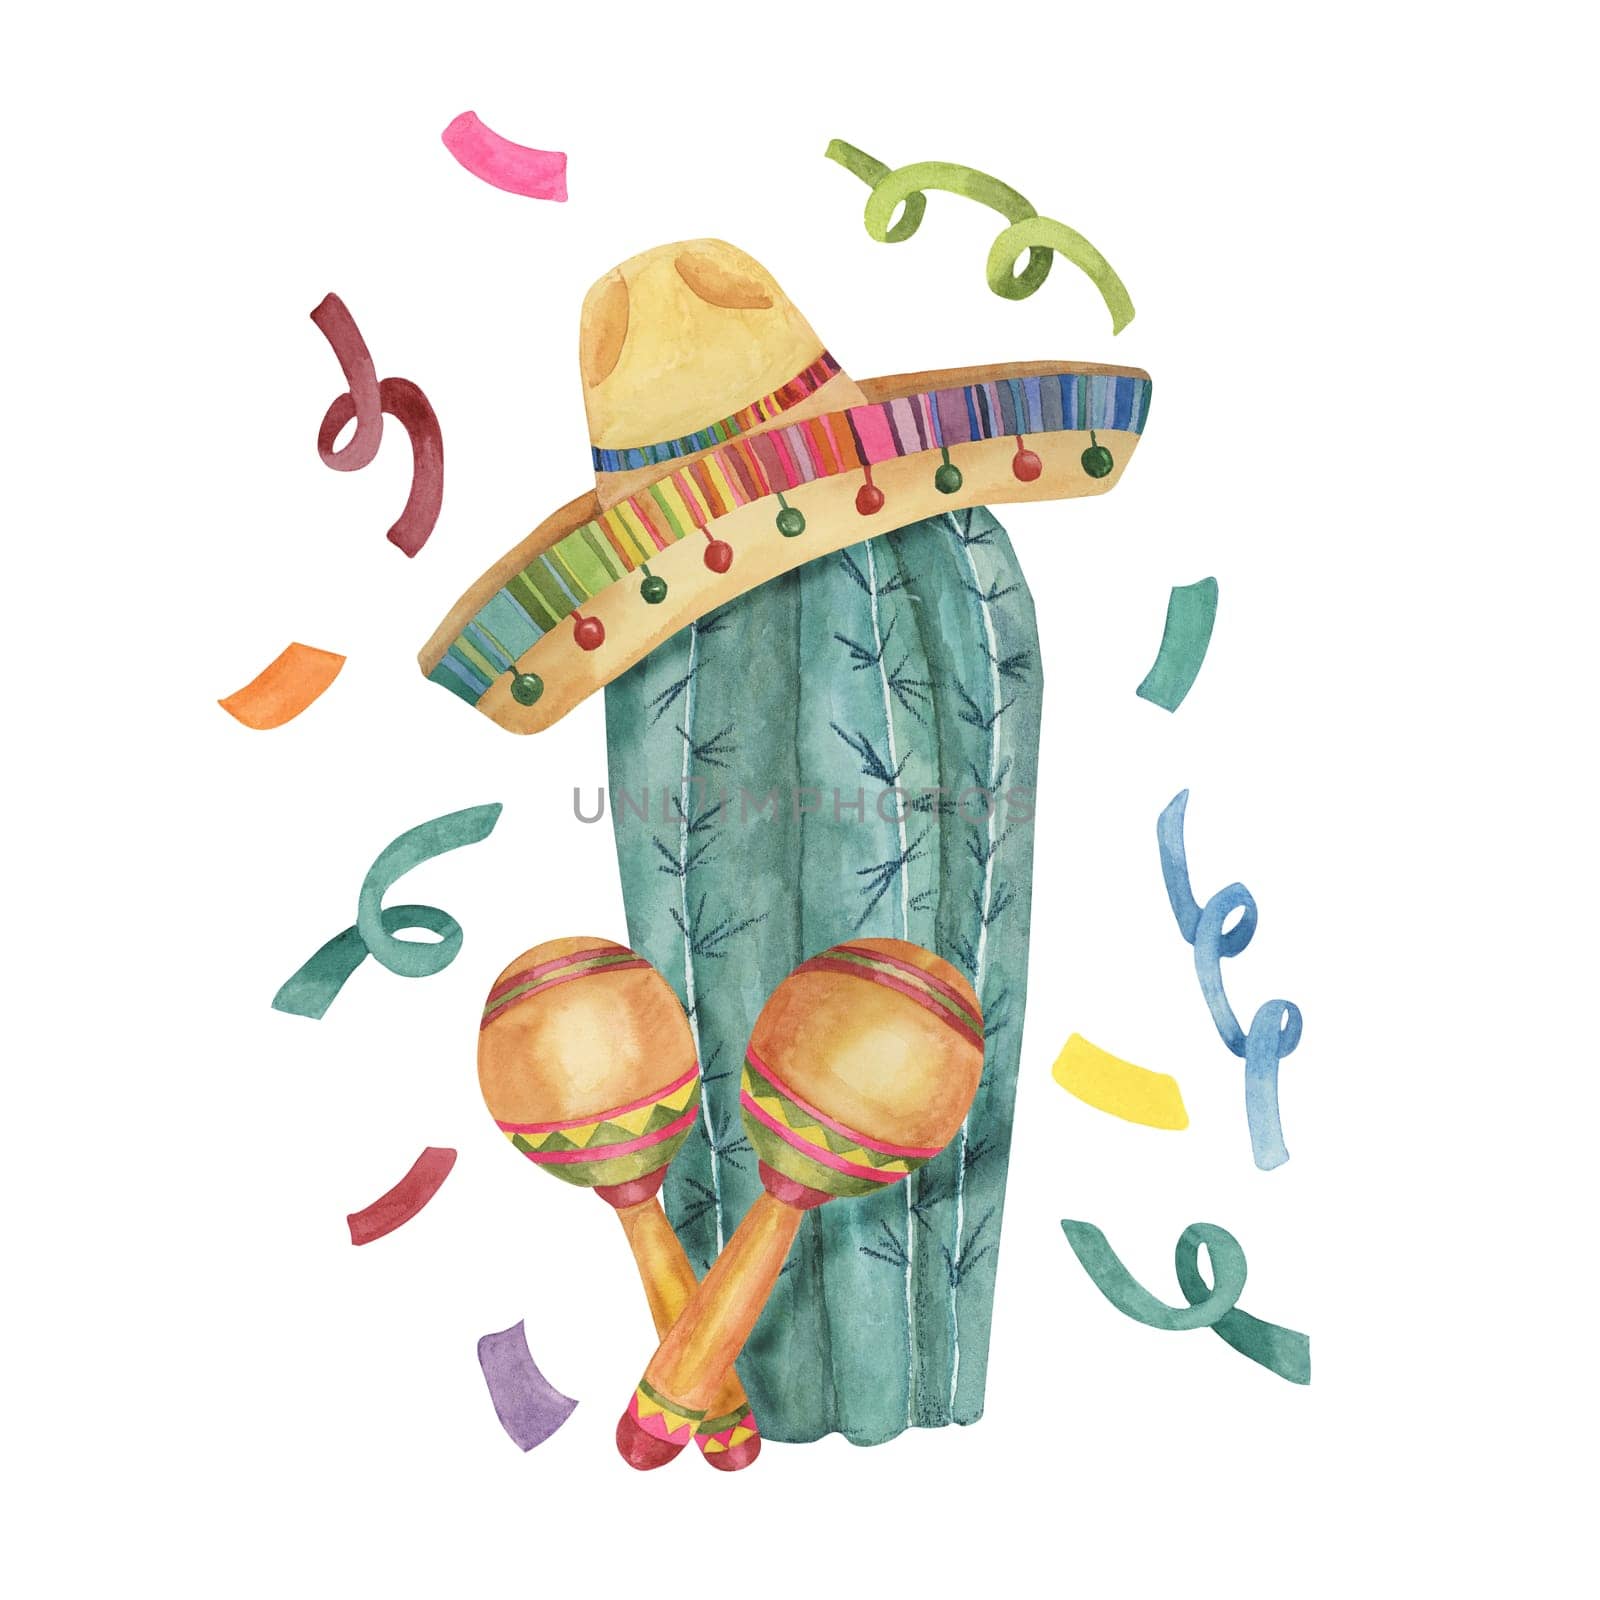 Cactus in sombrero with maracas and confetti. Watercolor illustration of cactus, hat, music instruments for Cinco de Mayo holiday. Clipart for printing, packaging, design isolated on white background.